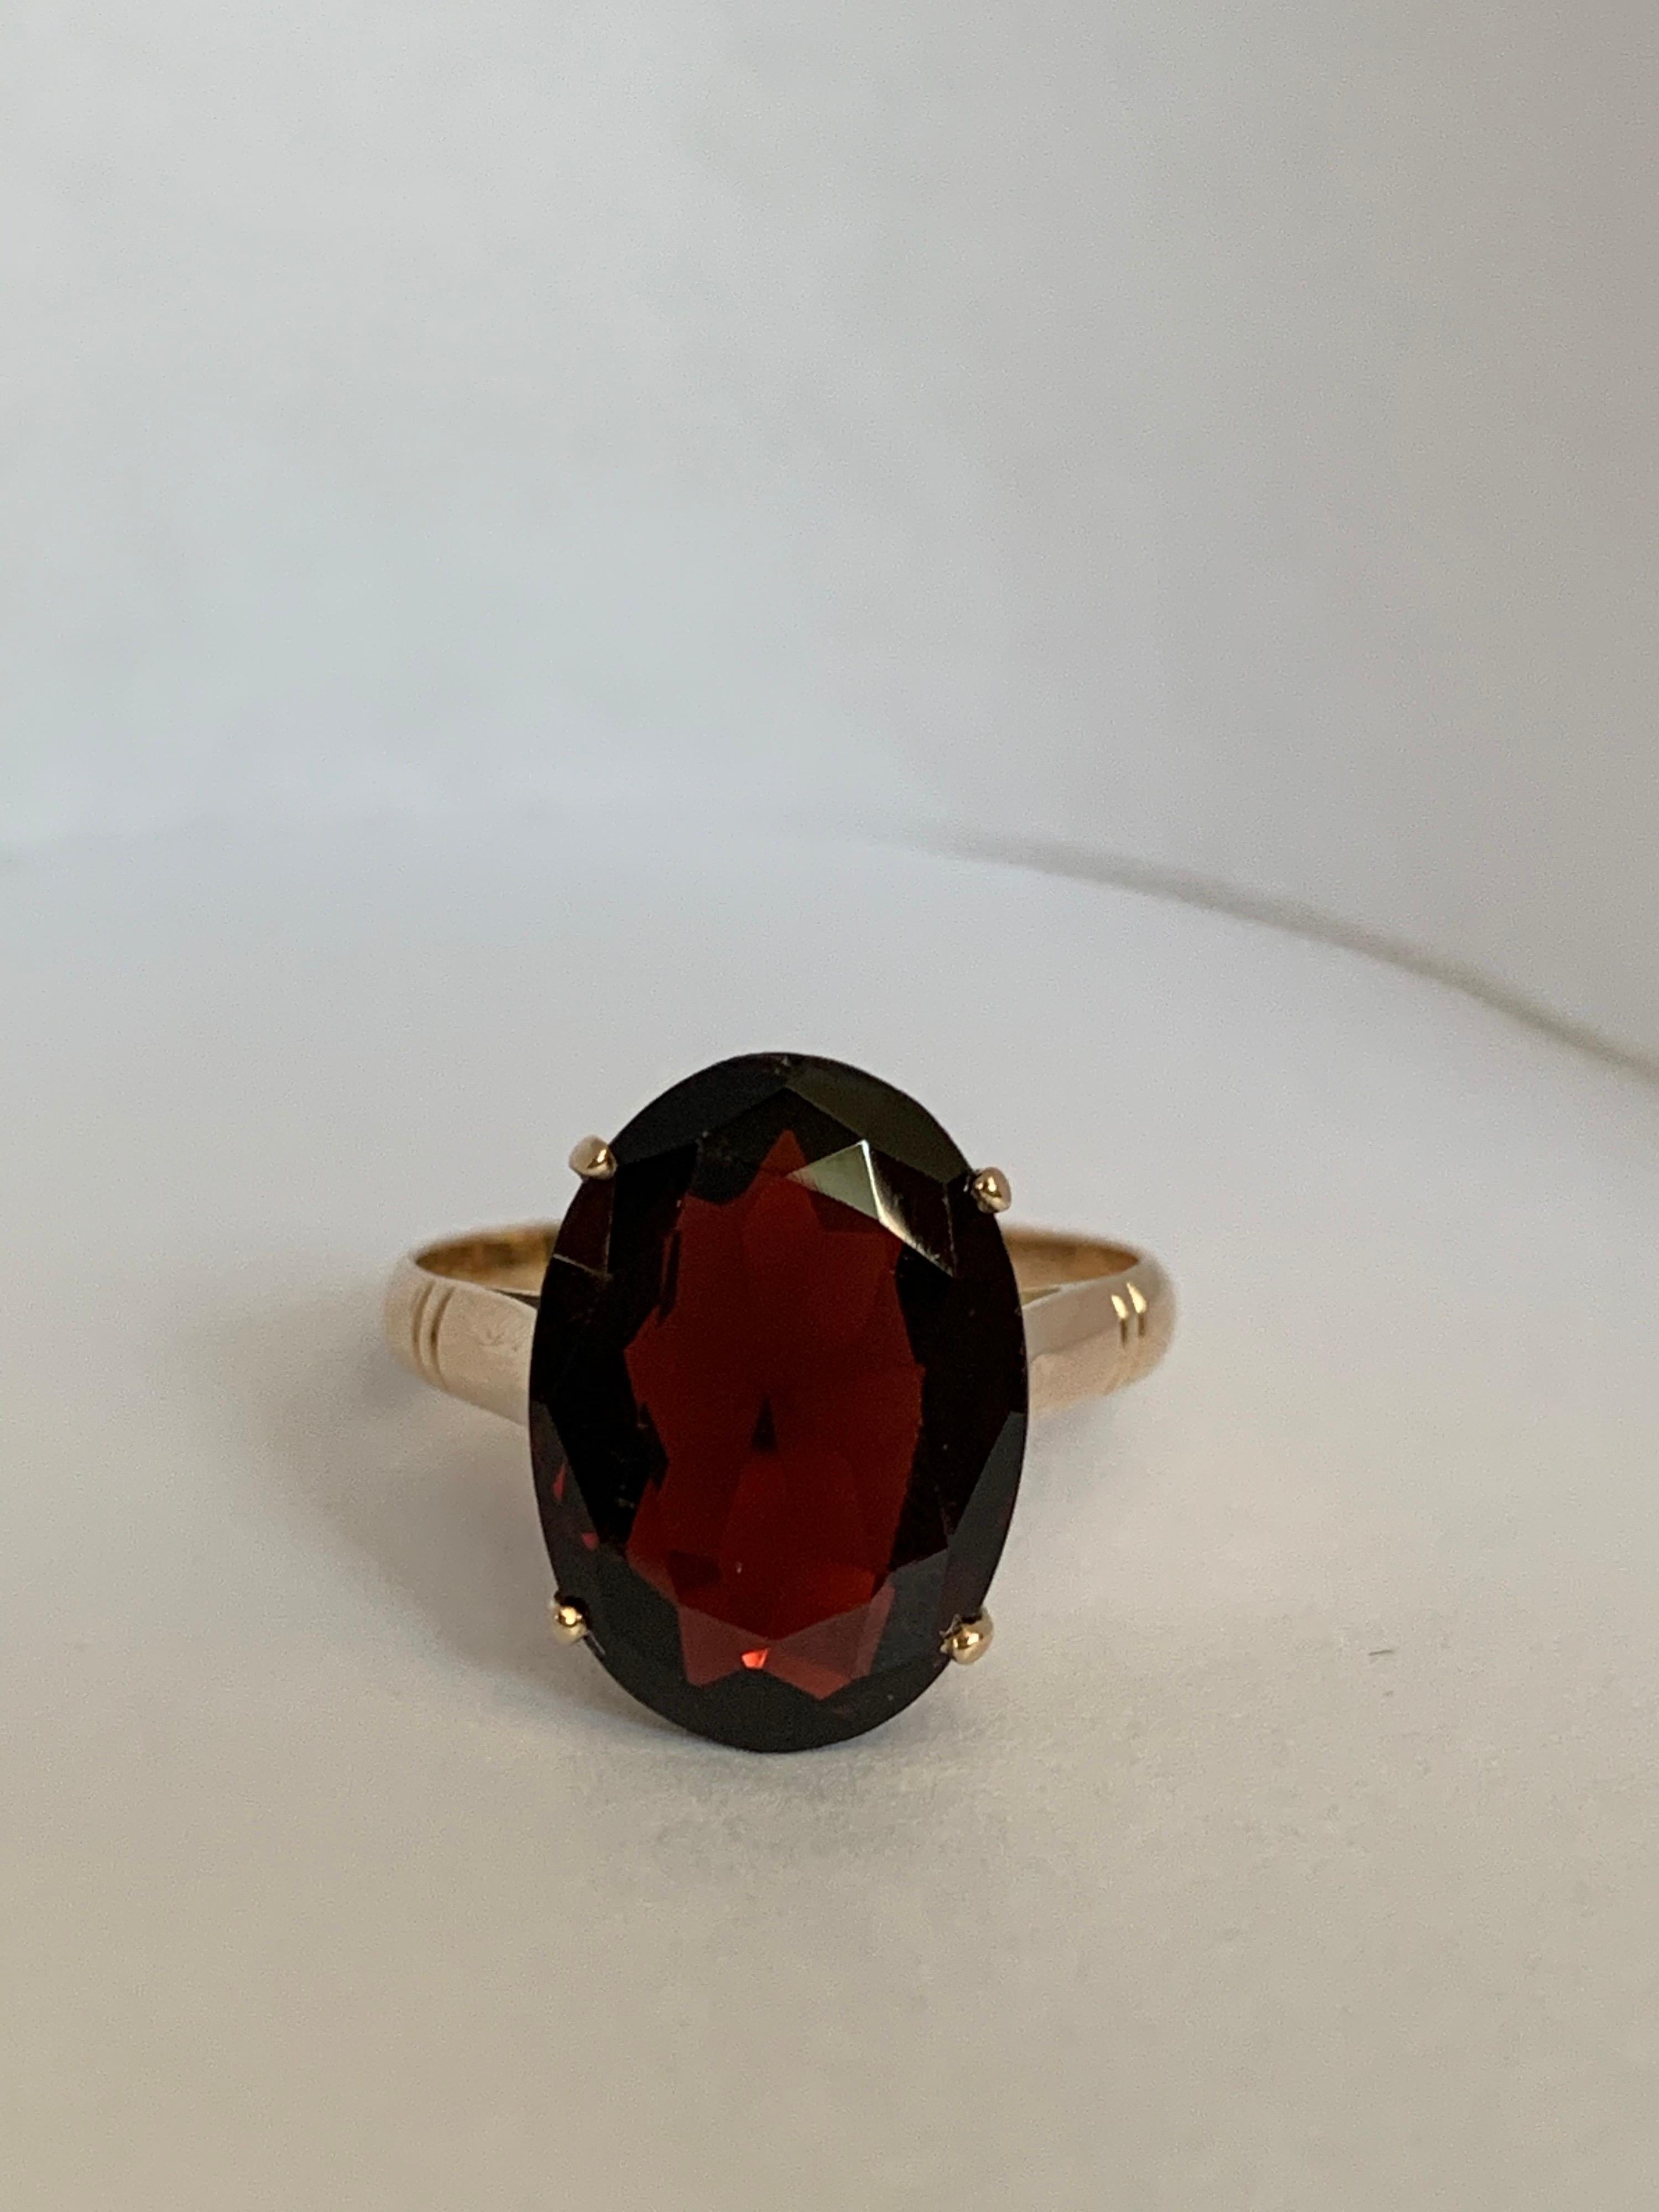 Oval 10 mm X 14 mm Garnet set in 14 Karat yellow gold ring is 100%hand crafted ring and the stone is hand cut and polished. The ring is one of a kind and sizable 6.75.